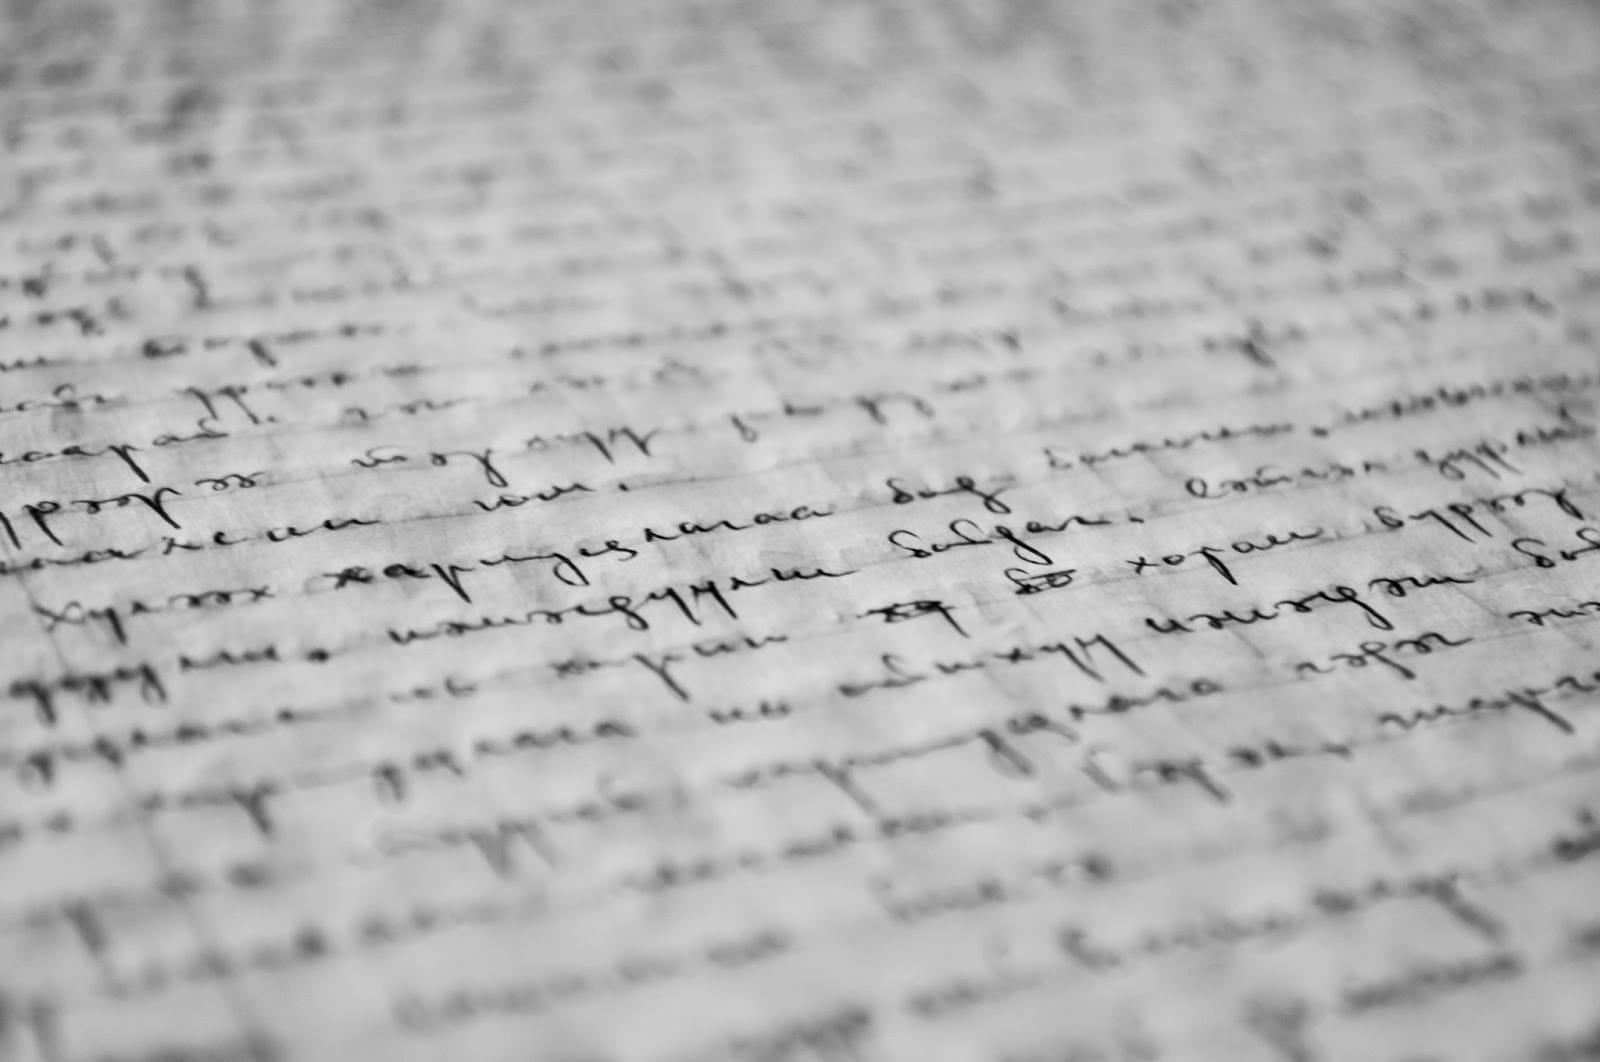 A close-up macro picture of written words on a piece of paper